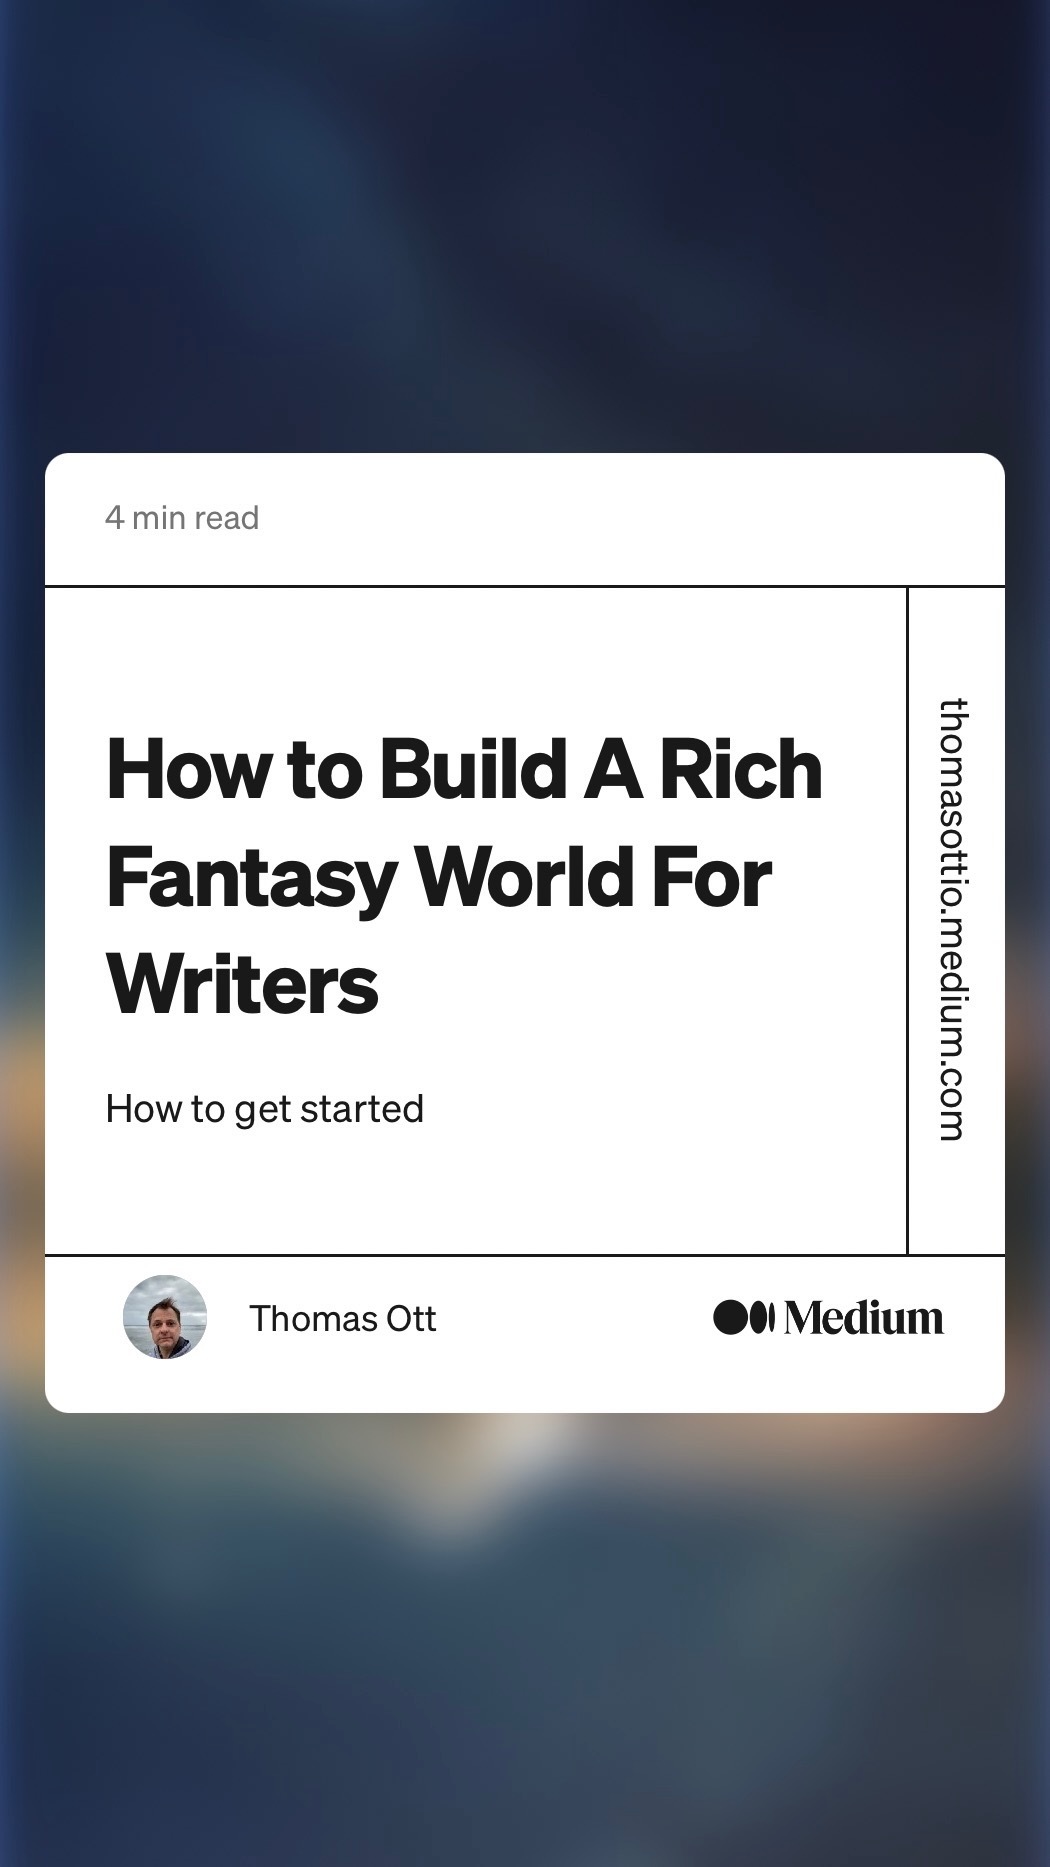 How to Build a Rich Fantasy World for Writers